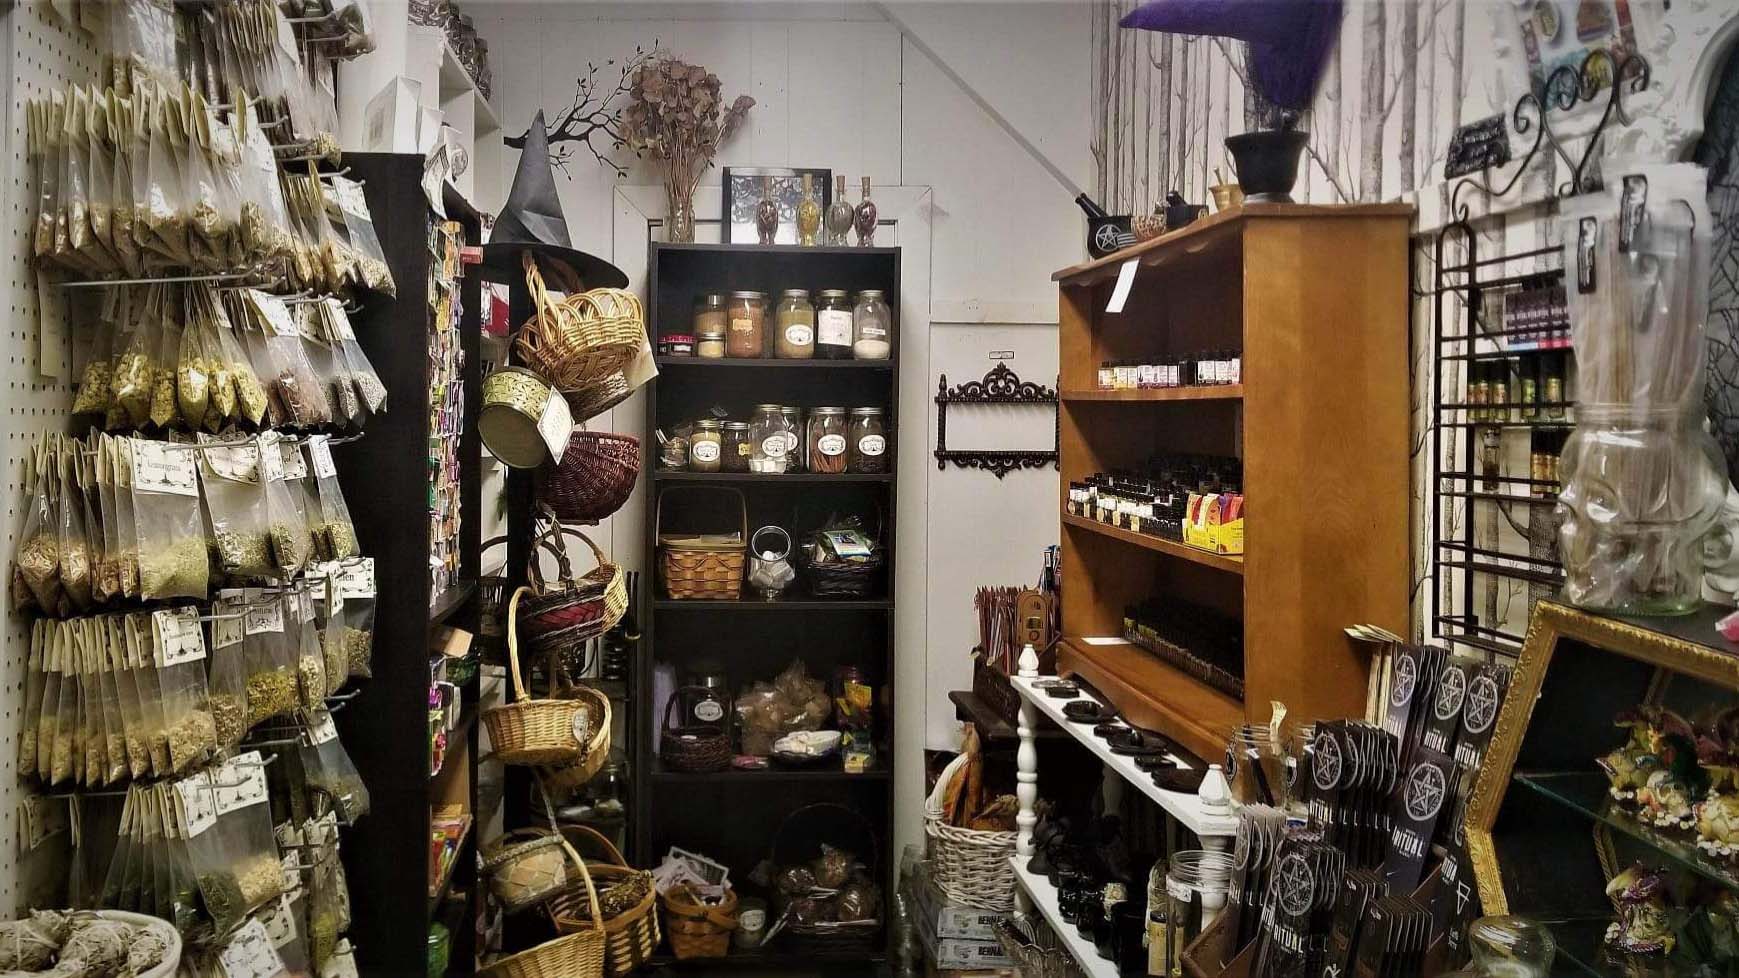 Shazara Khan spoke to the owner of the Neighbourhood Witch General Store about witchcraft traditions and how they are perceived in popular culture.